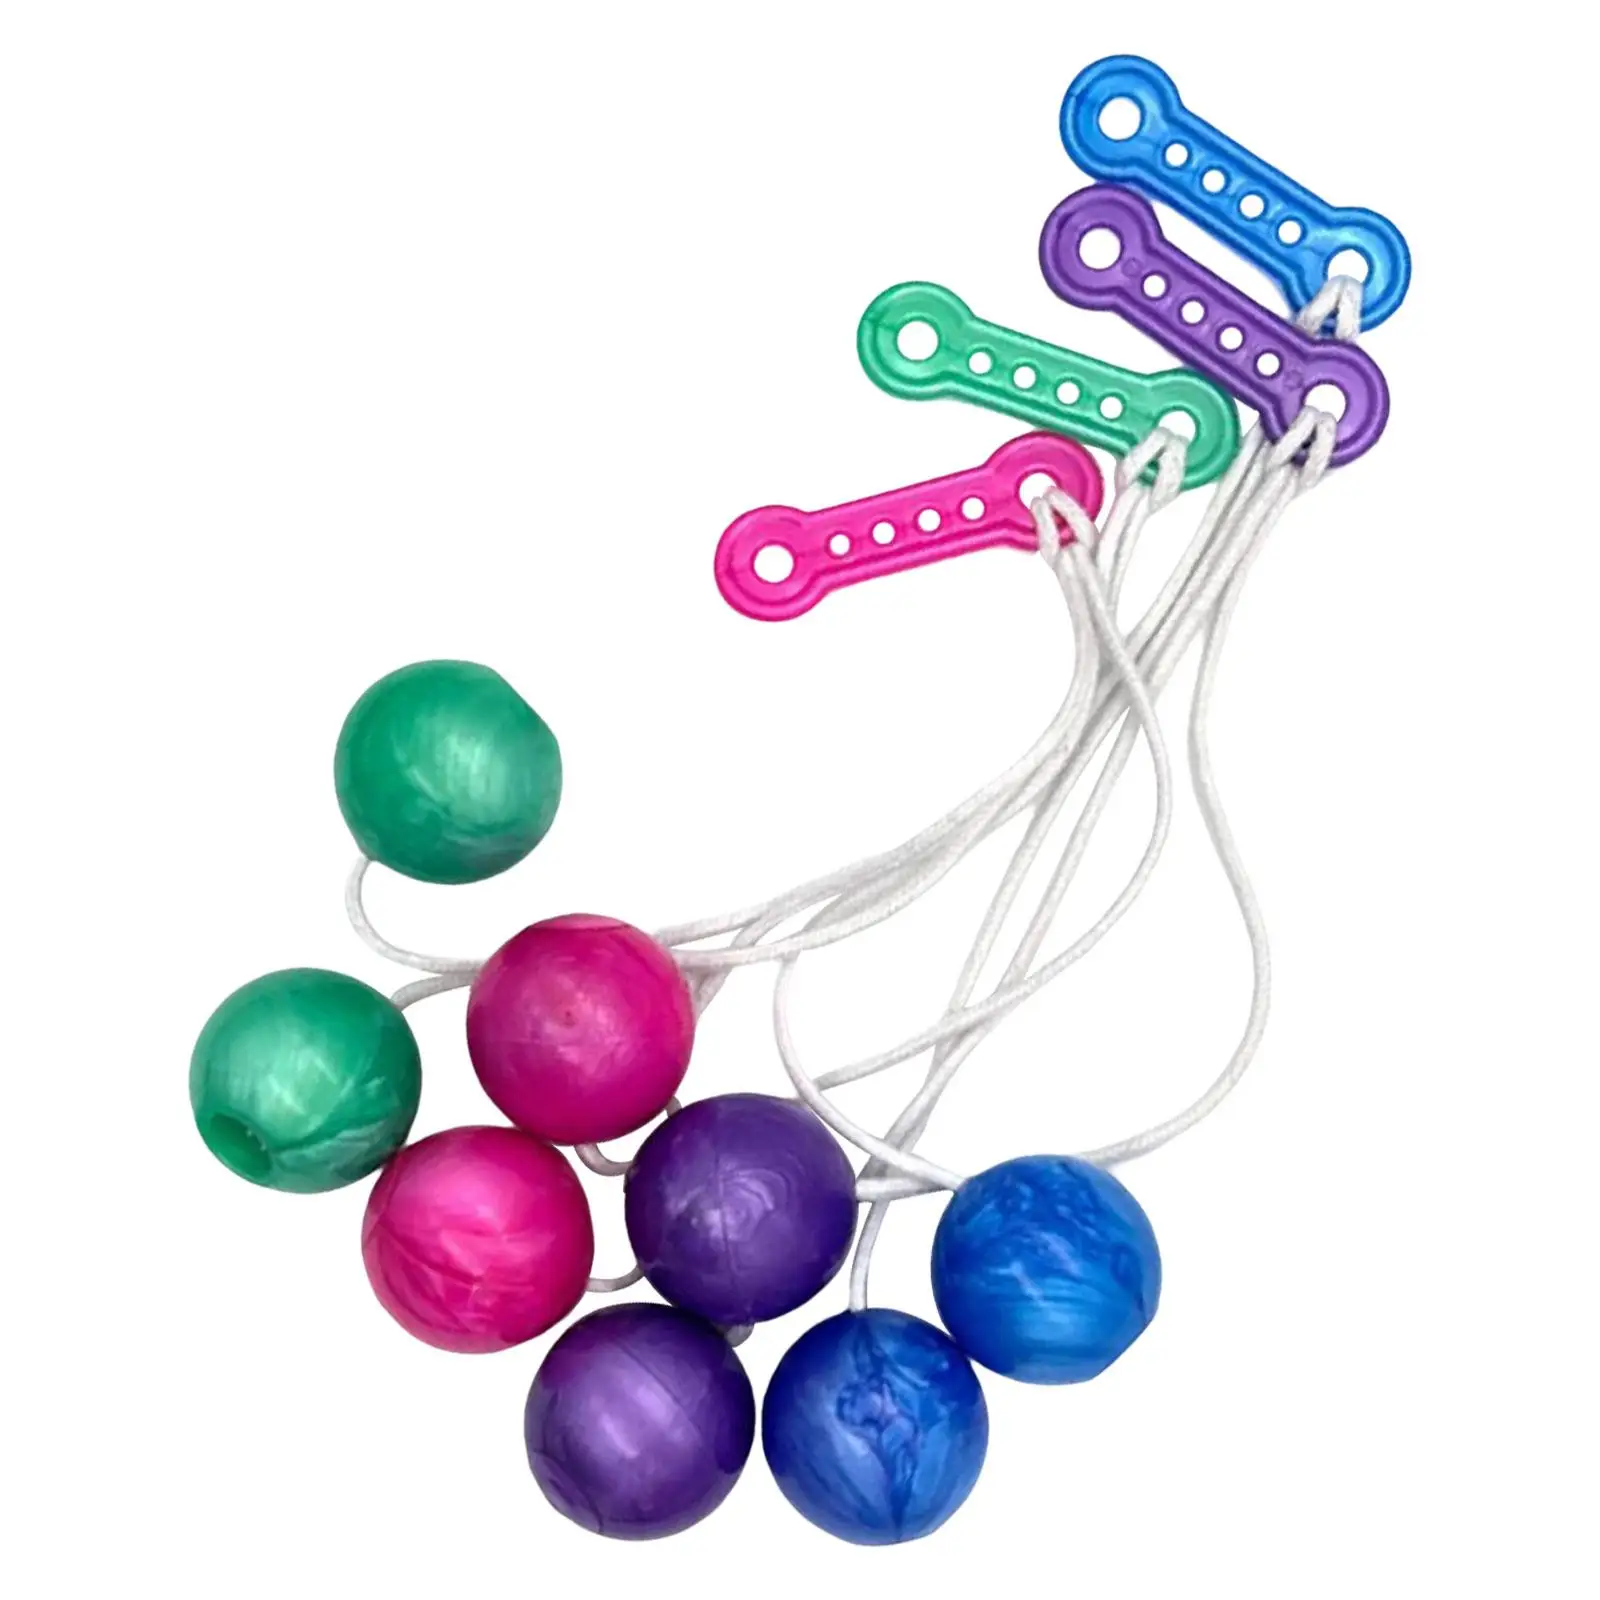 

Novelty Swing Bump Ball On A String Sensory Toy Hands On Abilities Hand Swing Rope Ball Toy for Stocking Stuffers Holiday Indoor